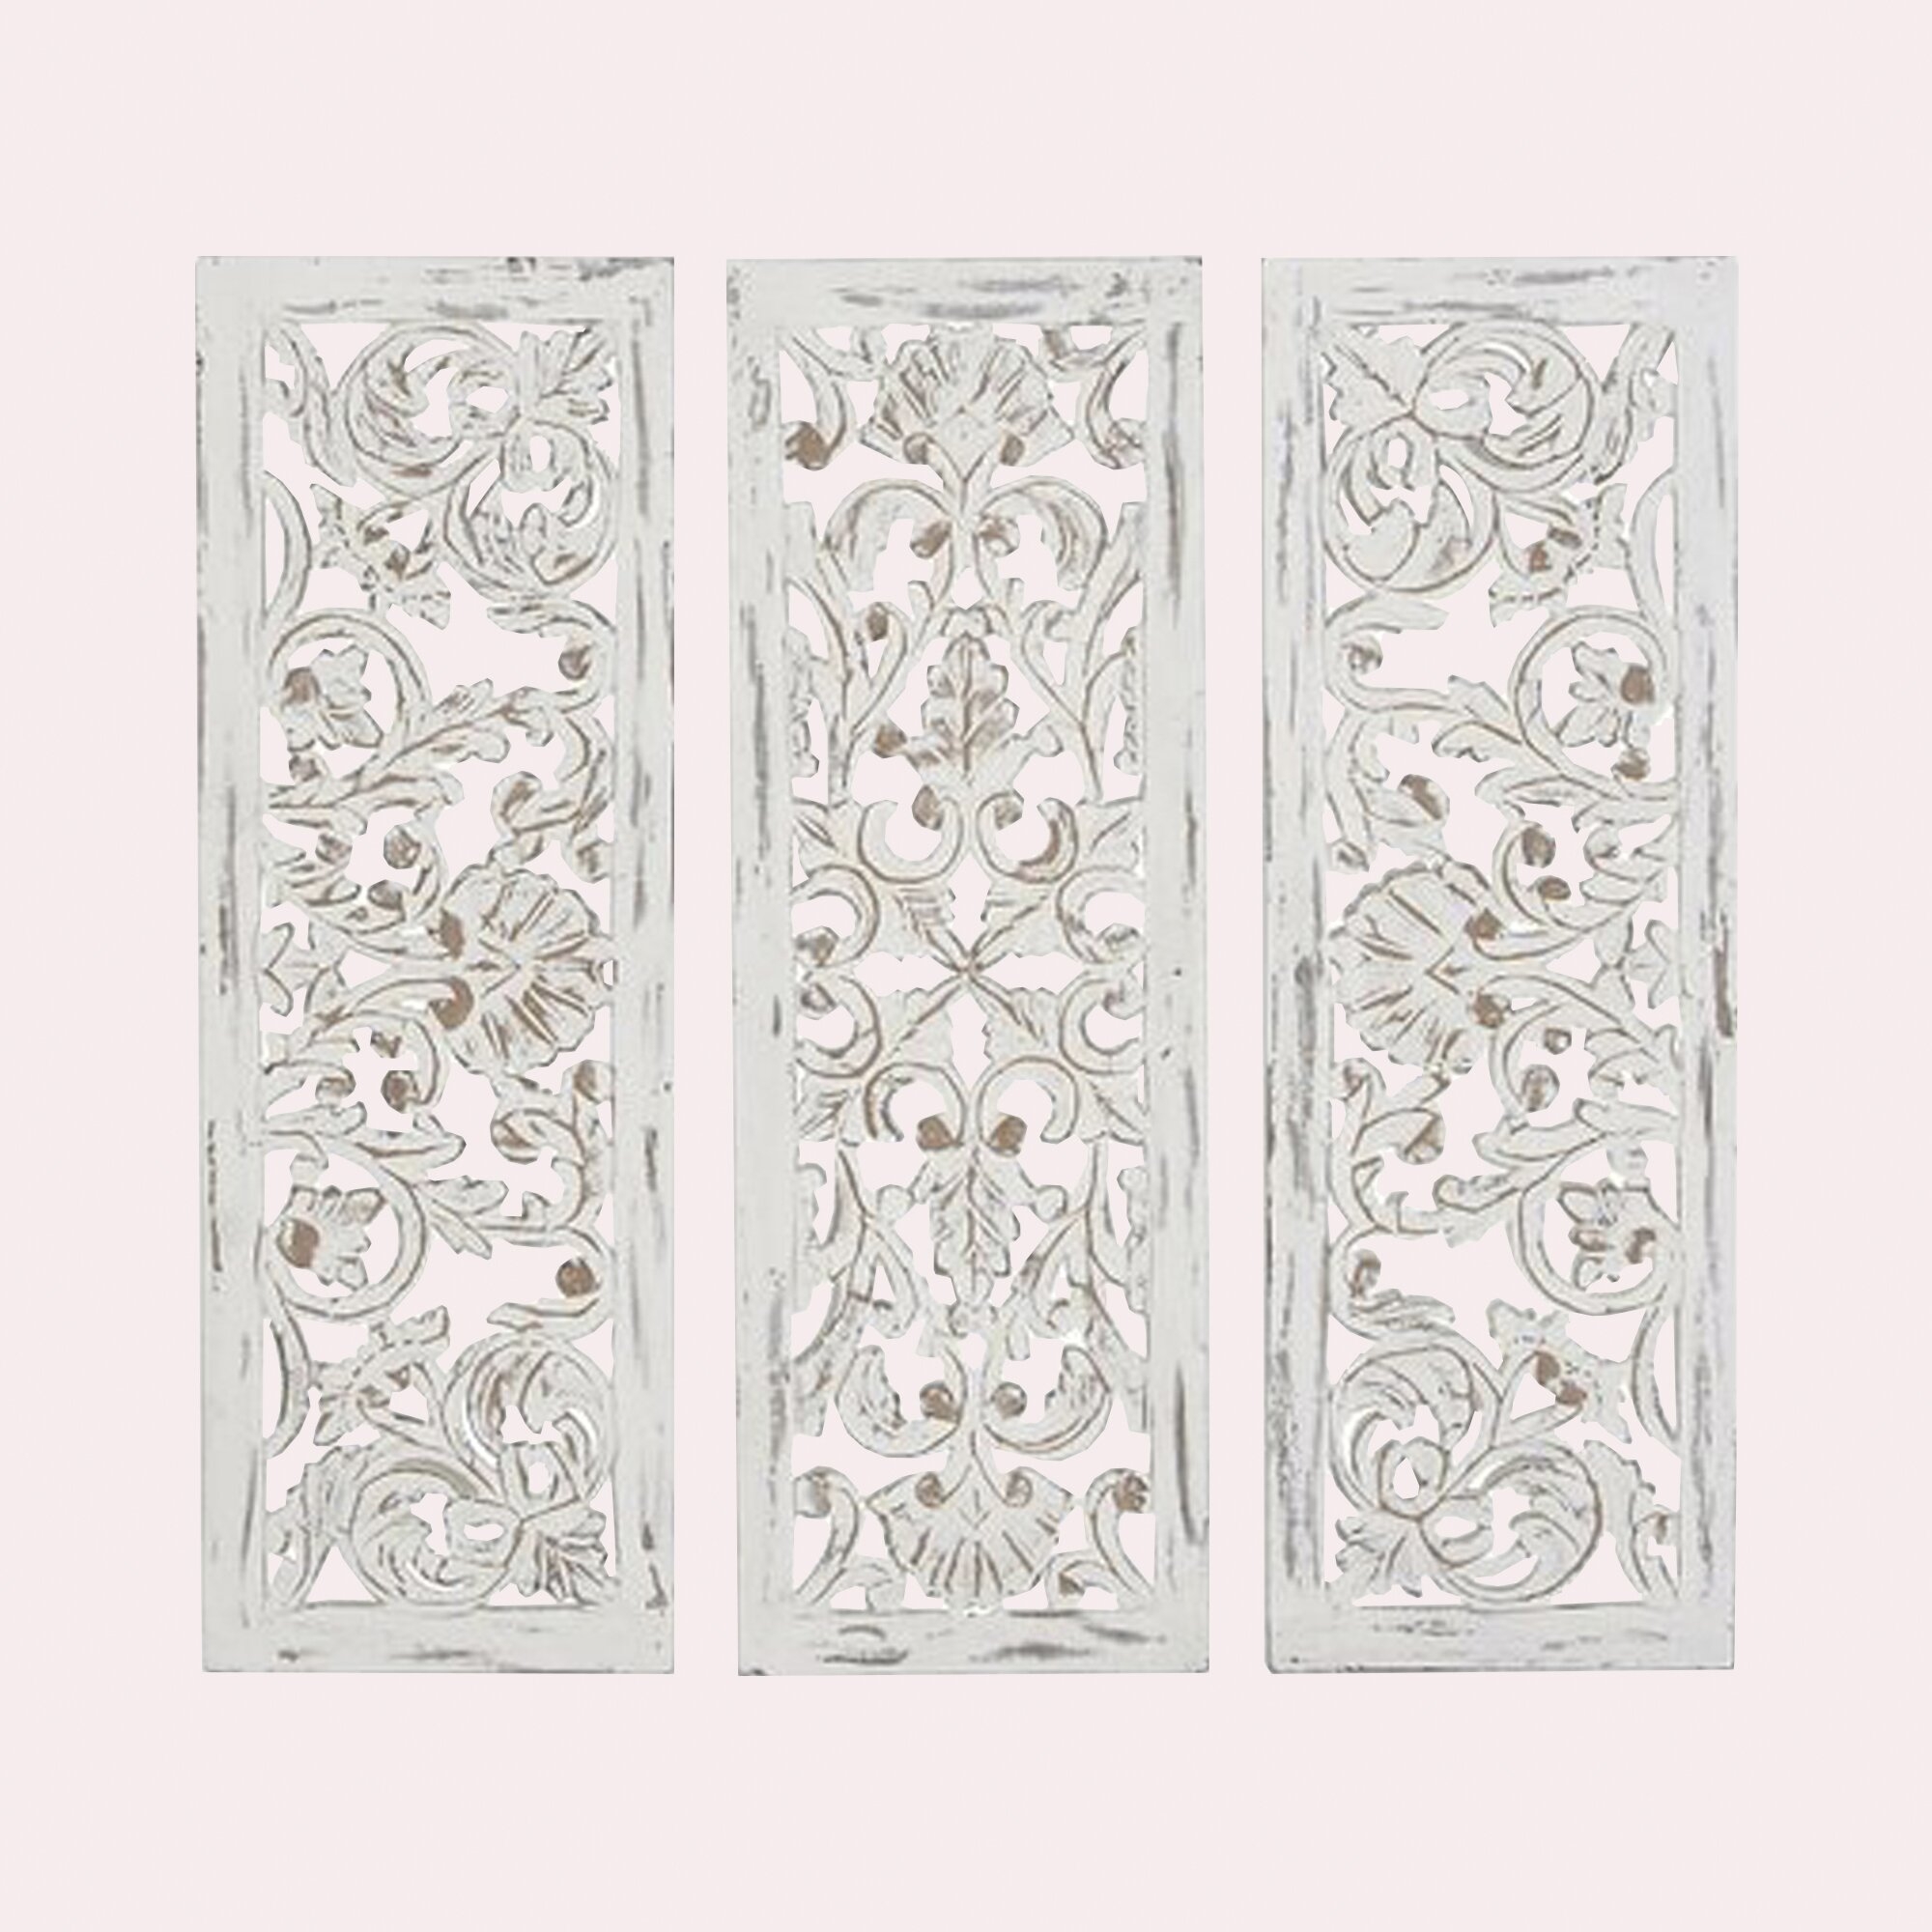 3 Piece Carved Ornate Wall Décor Set - Image 1